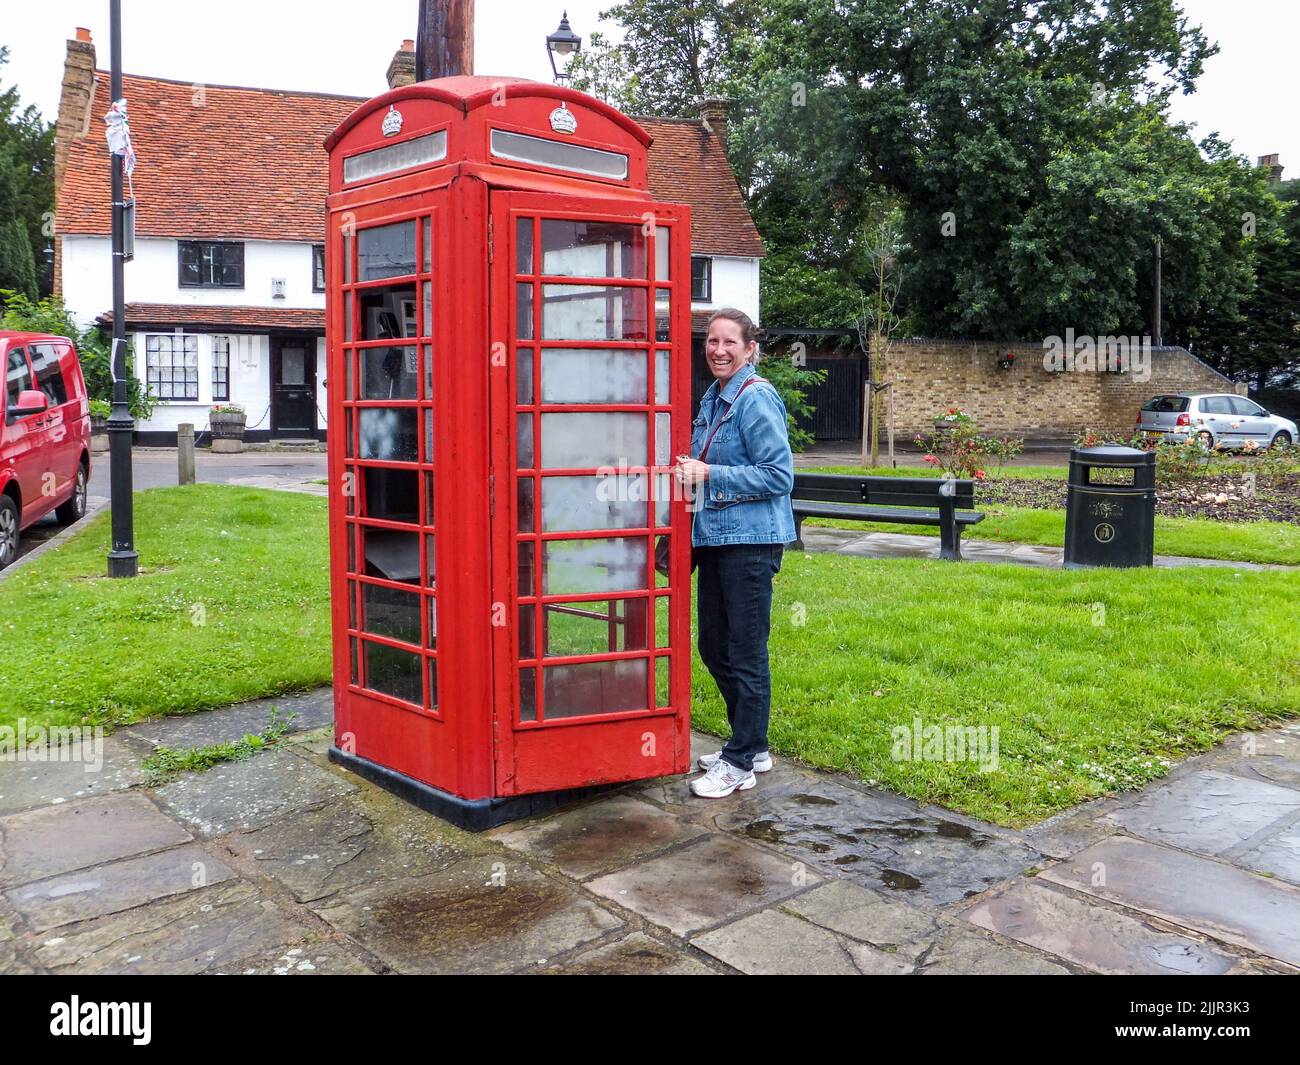 A woman opens the door and is about to enter an iconic red telephone booth in Harmondsworth, Hillingdon, Middlesex, London, England, UK. Stock Photo